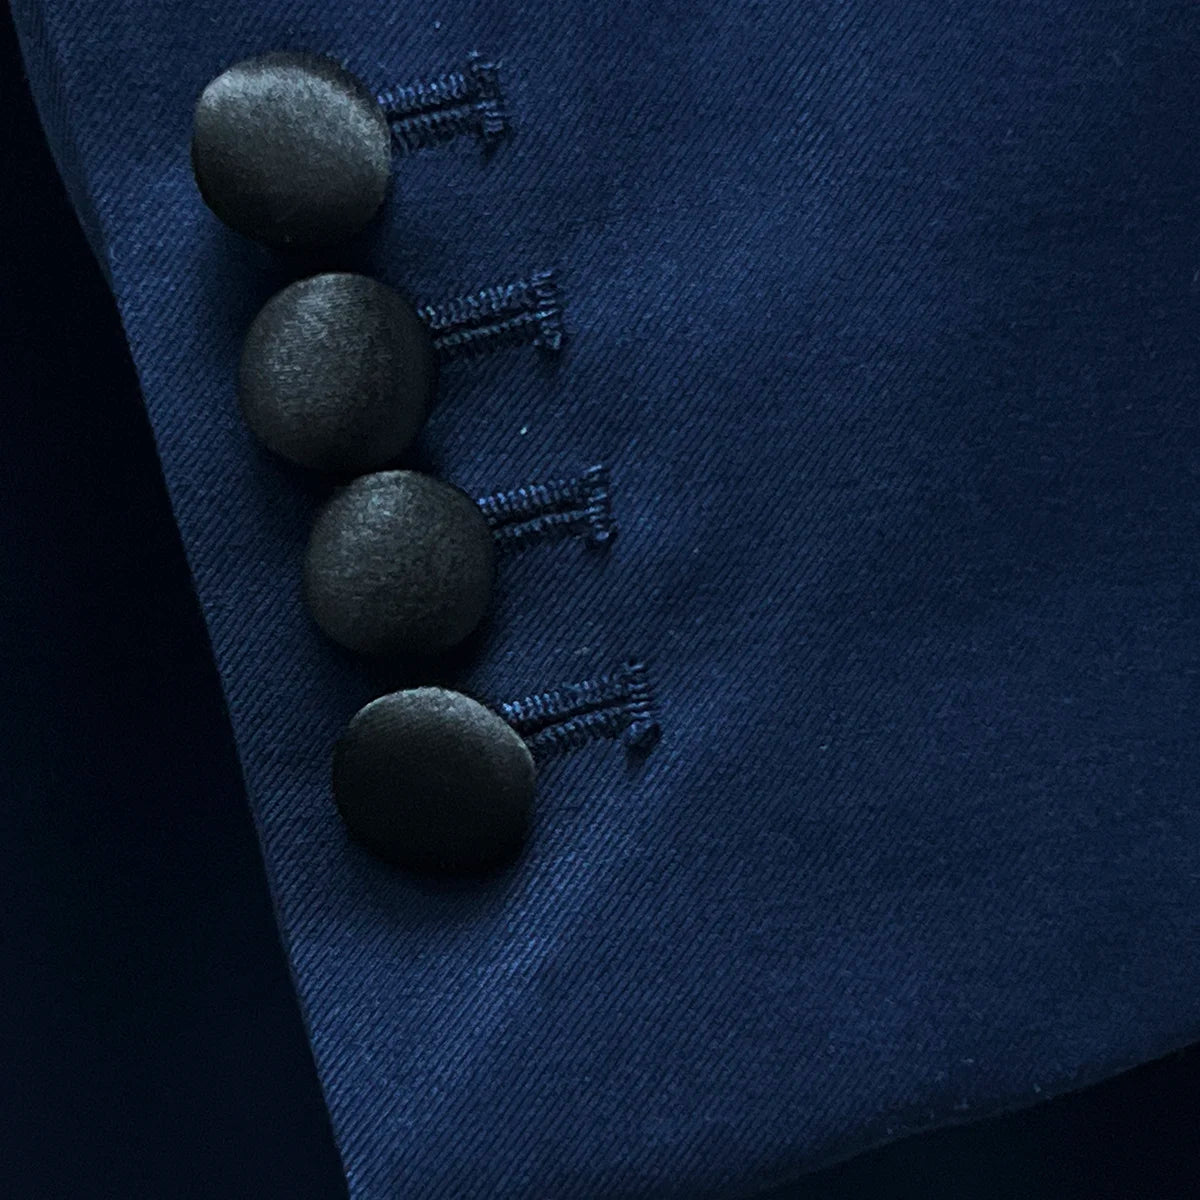 Close-up of the functional sleeve buttonholes, featuring the black silk satin-covered buttons and careful tailoring.